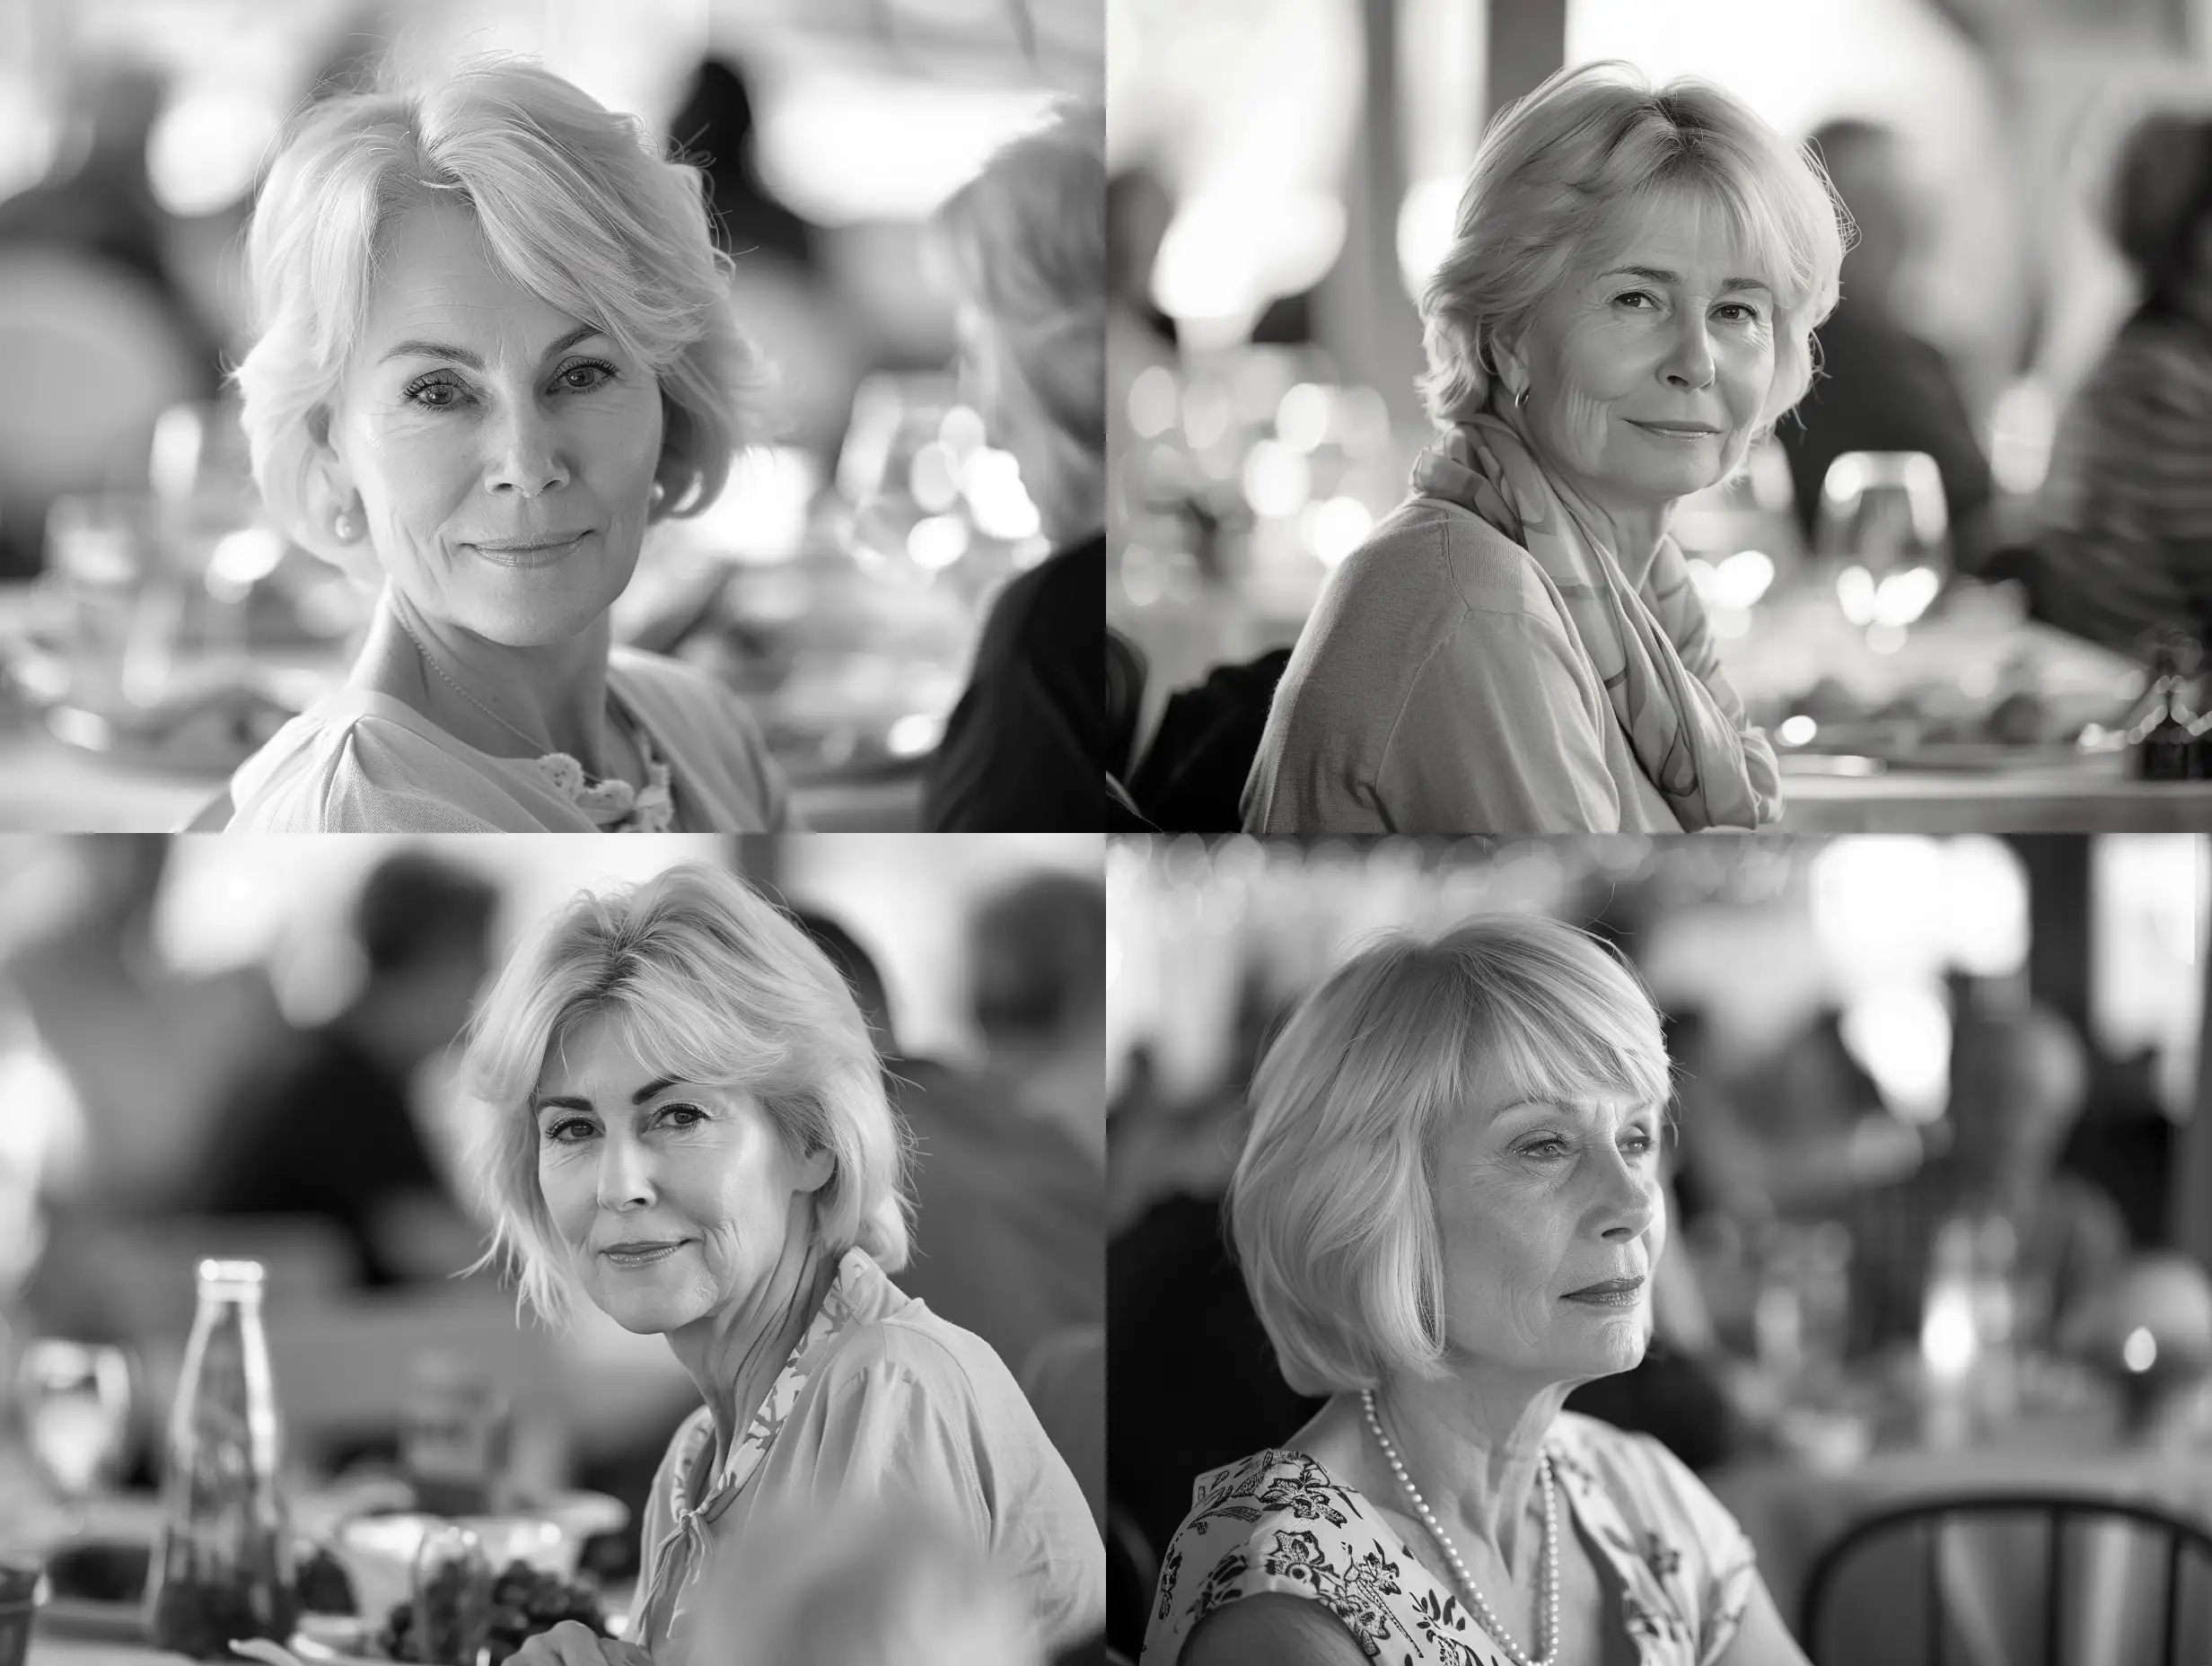 A beautiful blonde woman at a springtime church luncheon. She is 60 years old. her hair is short. This should be a black-and-white photo in the style of Man Ray's work from the 1920s.